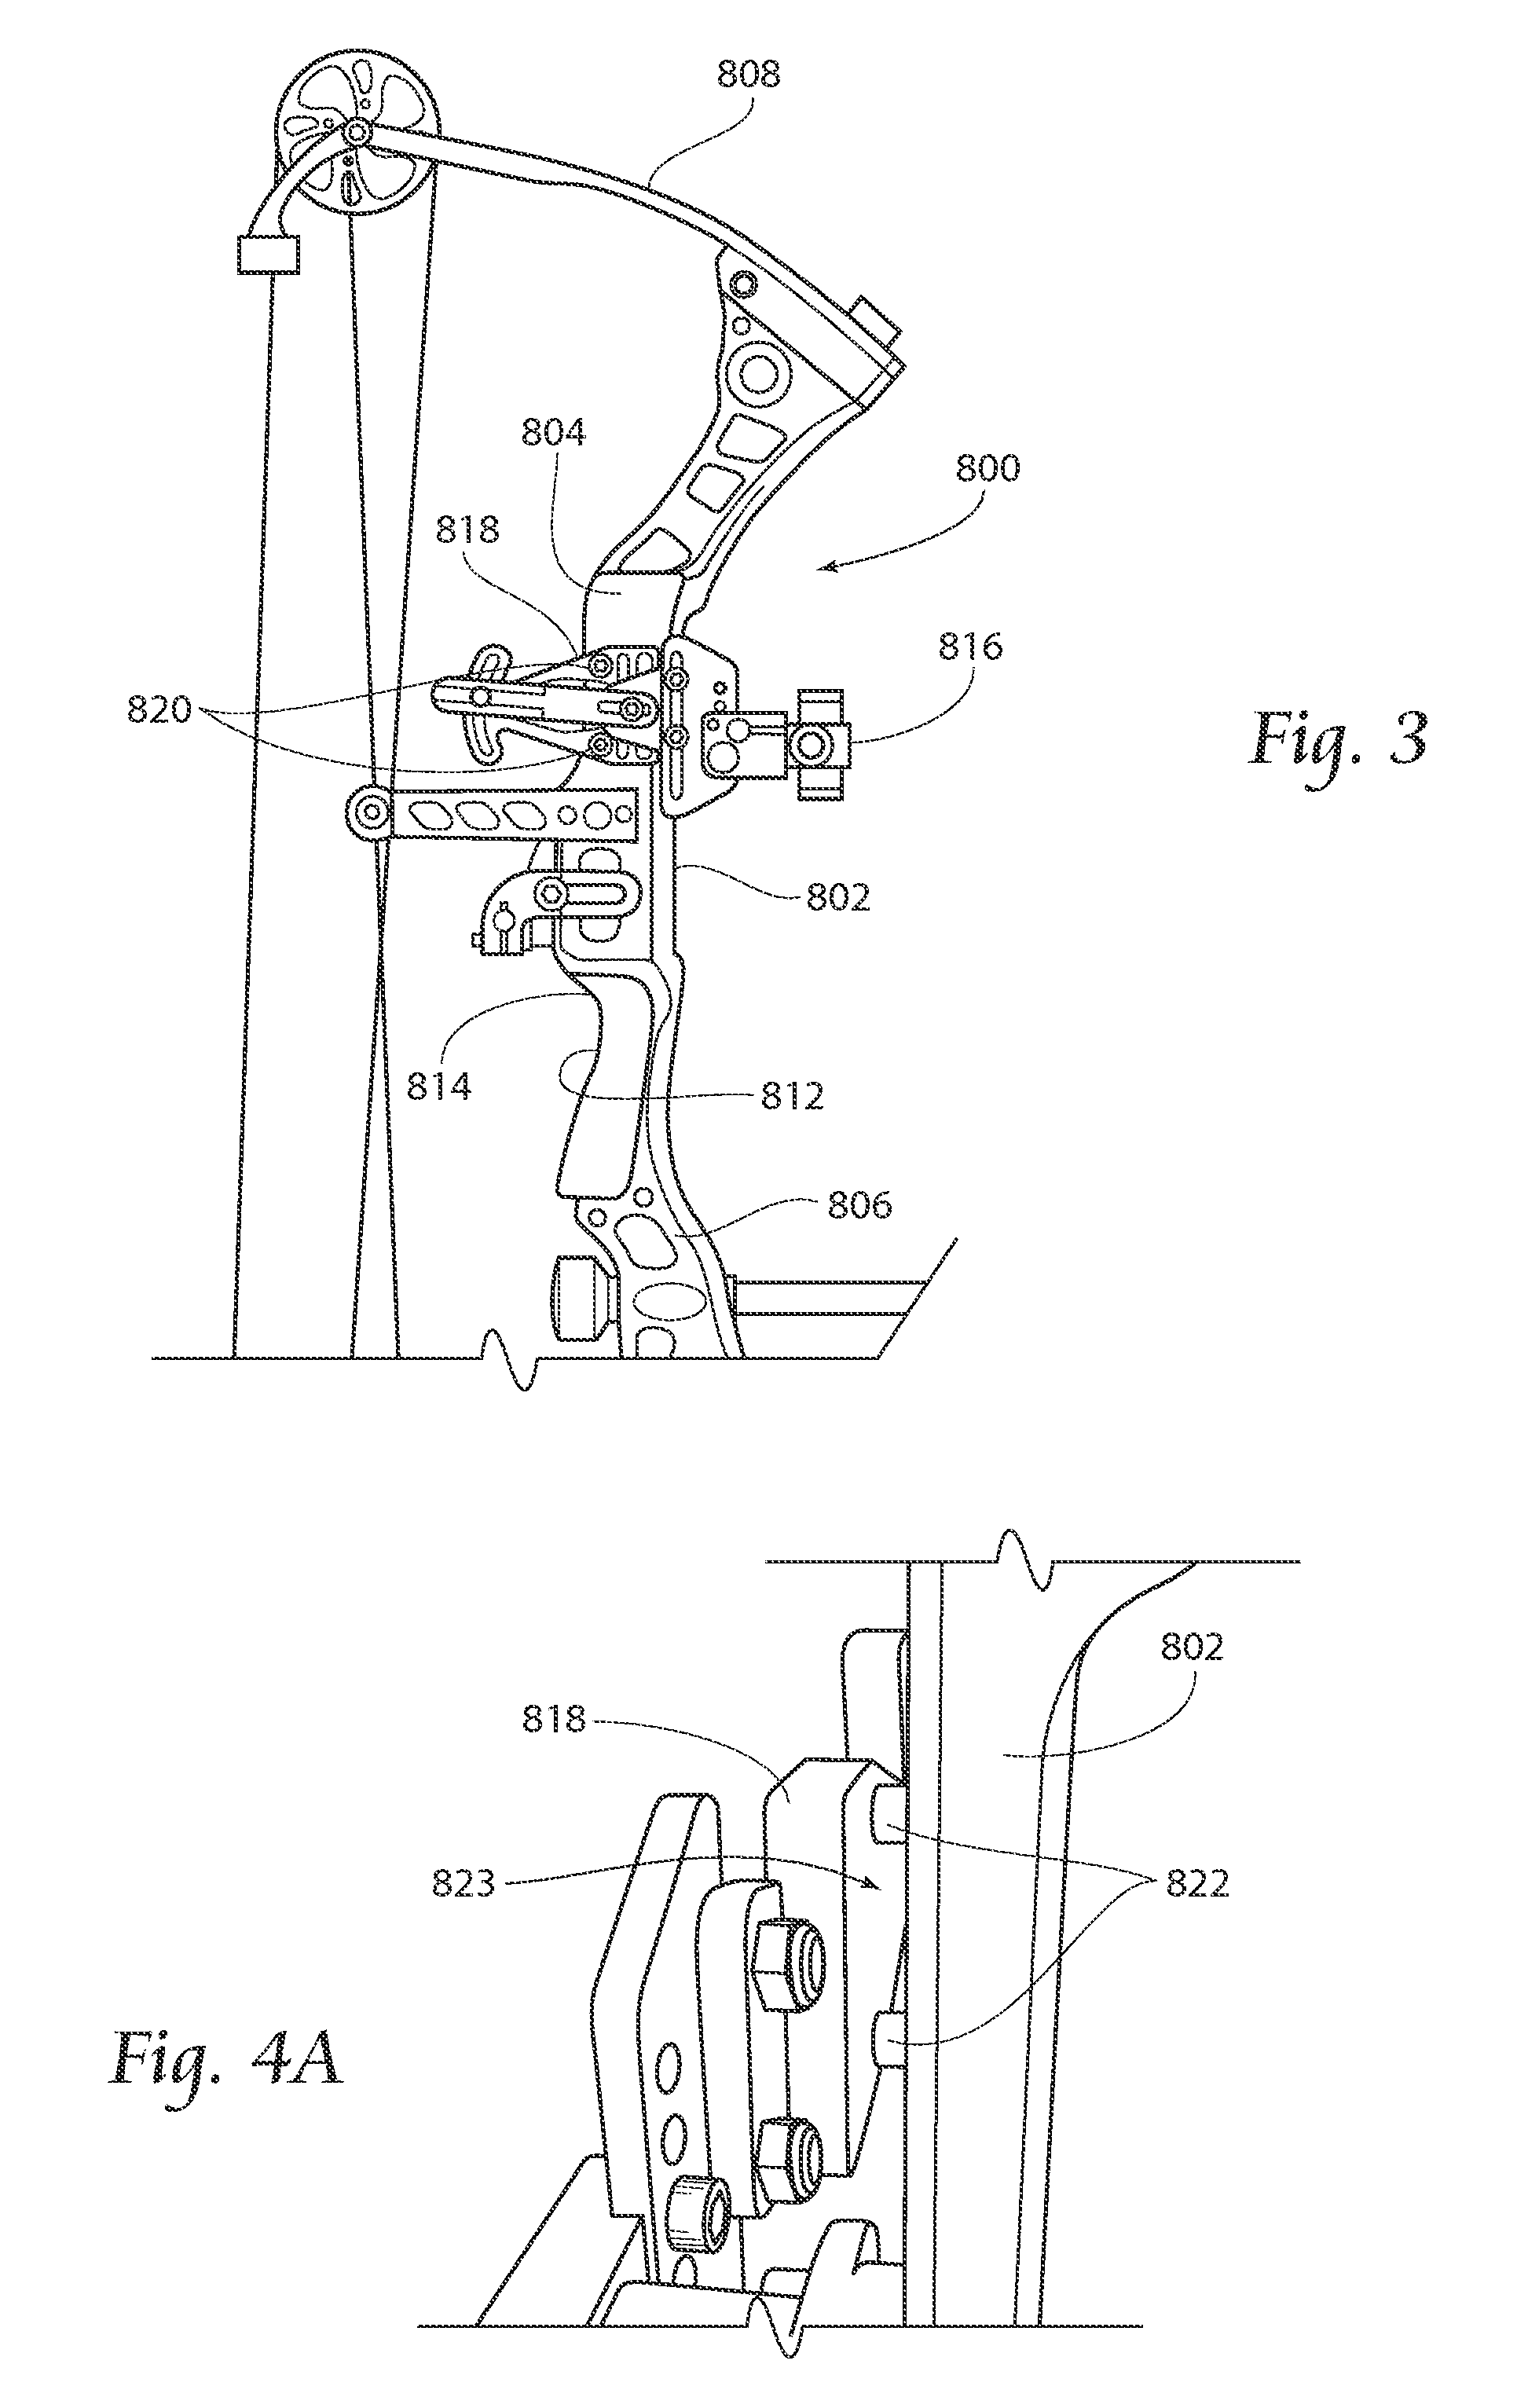 Systems and methods of accessory mounting